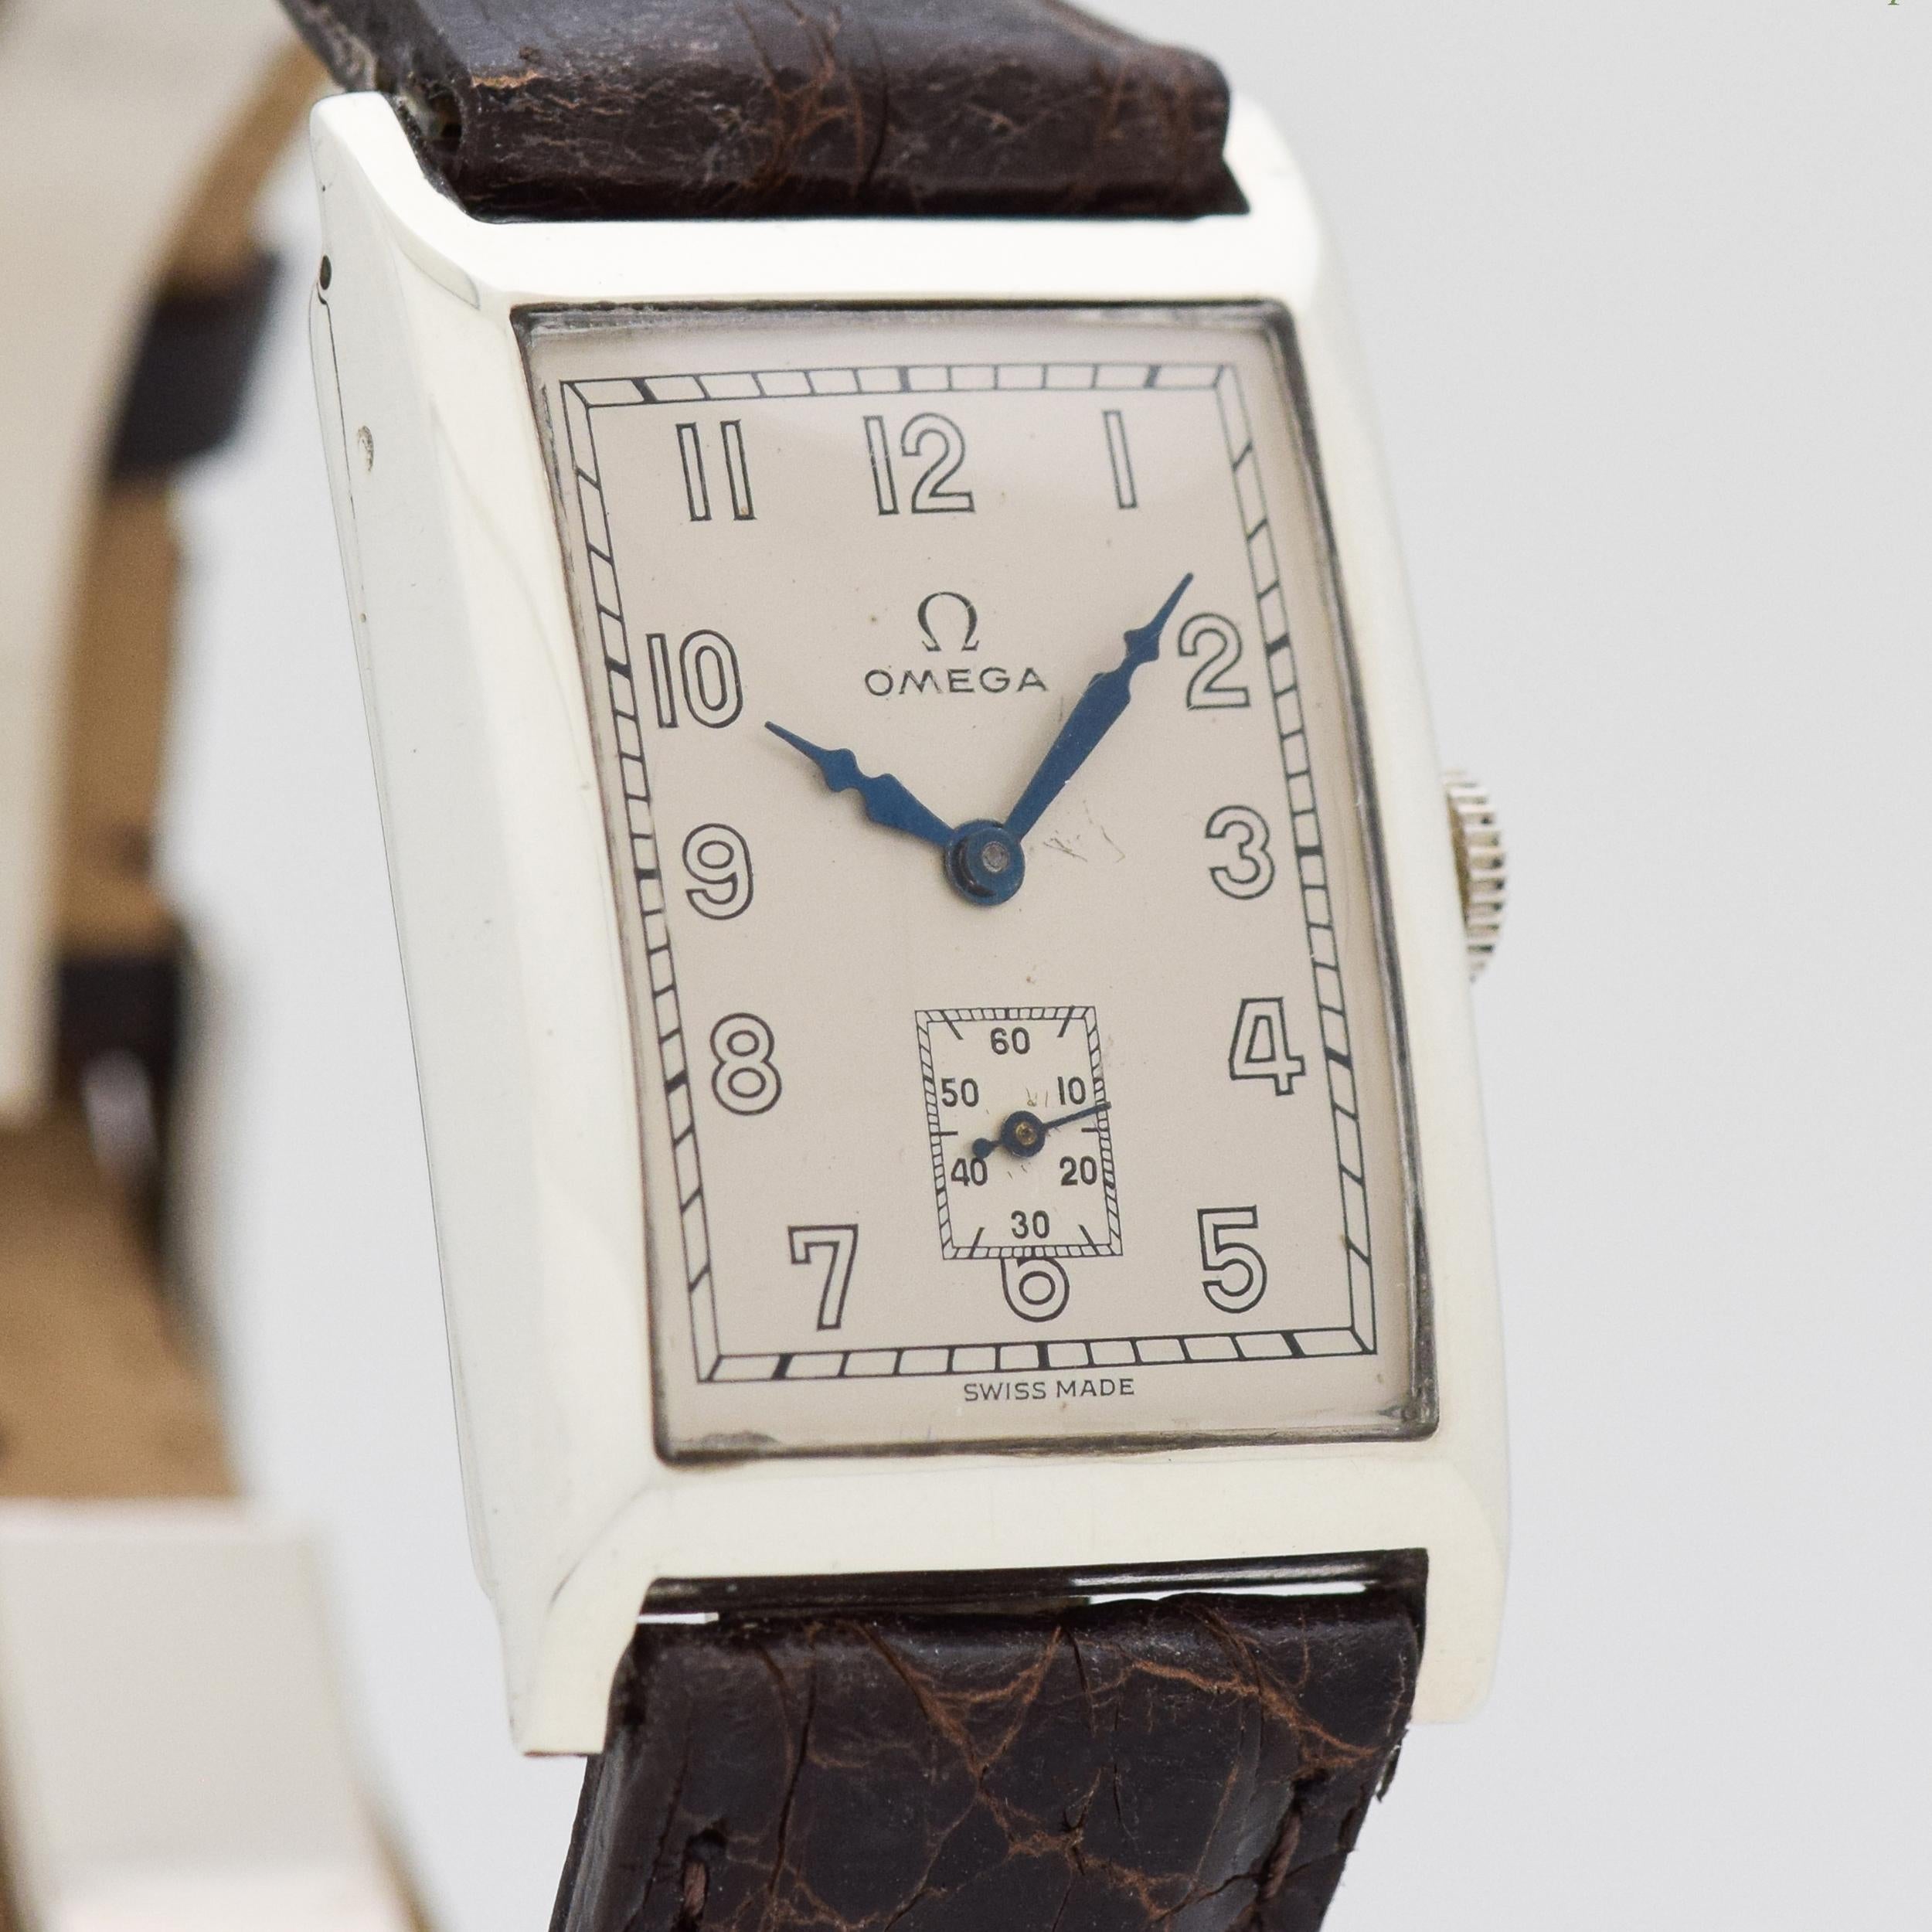 1929 Vintage Omega Rectangular-shaped Silver Watch. Original, restored dial with open-Arabic numerals & Blued Steel hands. 24mm x 38mm. Equipped with a 15-jewel, manual caliber movement. Featured on a 100% Genuine Crocodile Glossy Dark Chocolate